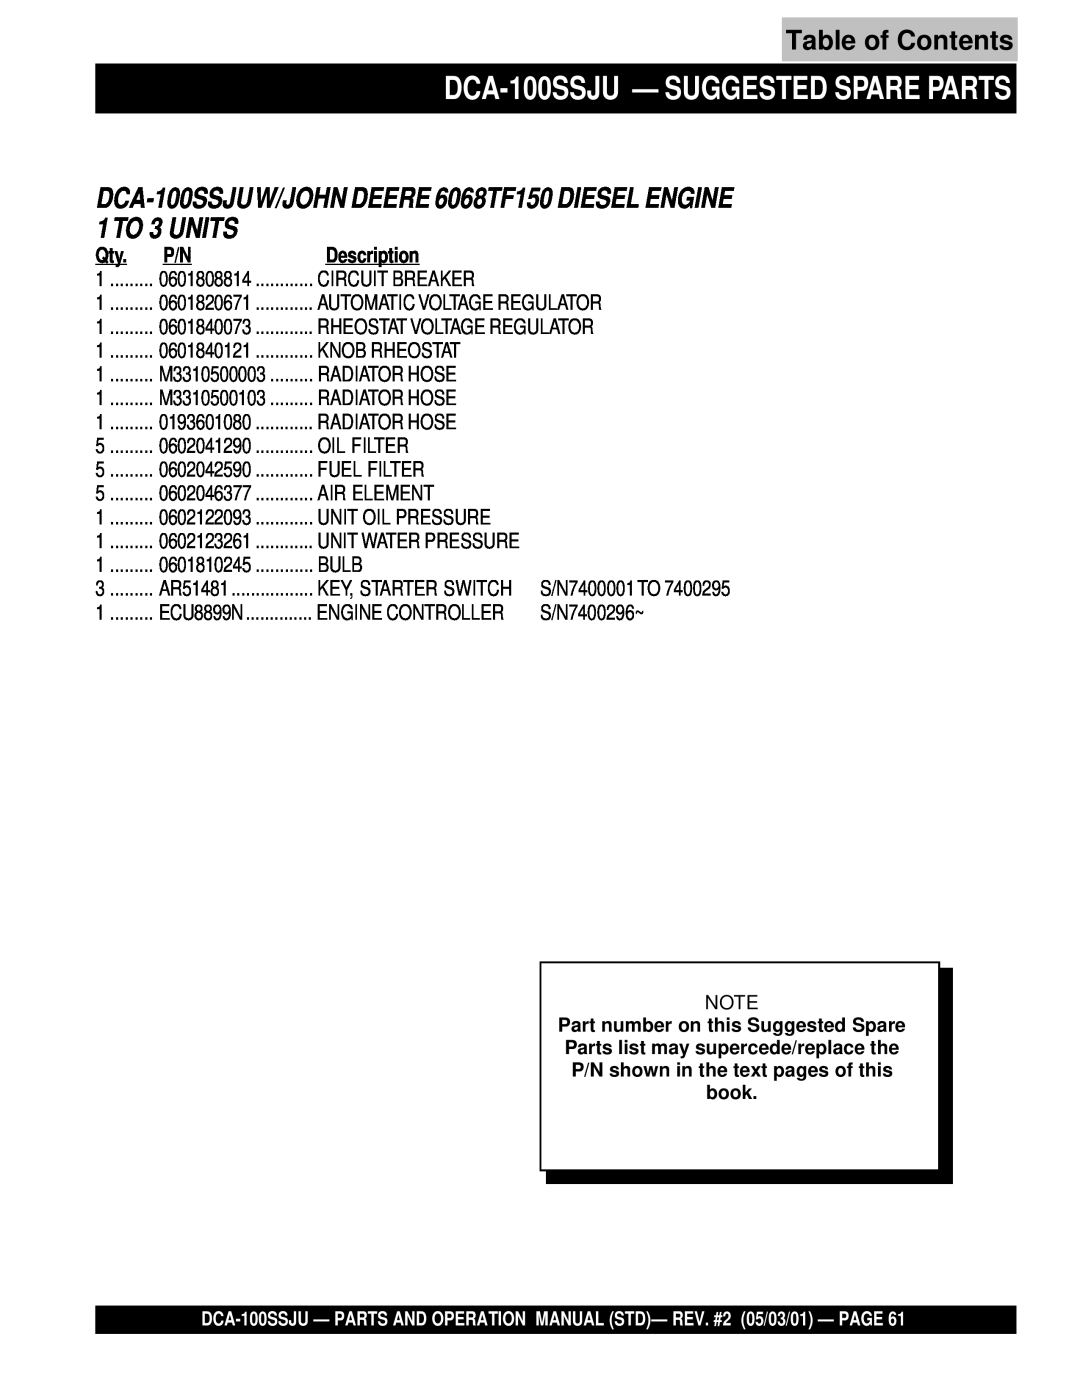 Multiquip operation manual DCA-100SSJU— SUGGESTED SPARE PARTS, Table of Contents, Description 